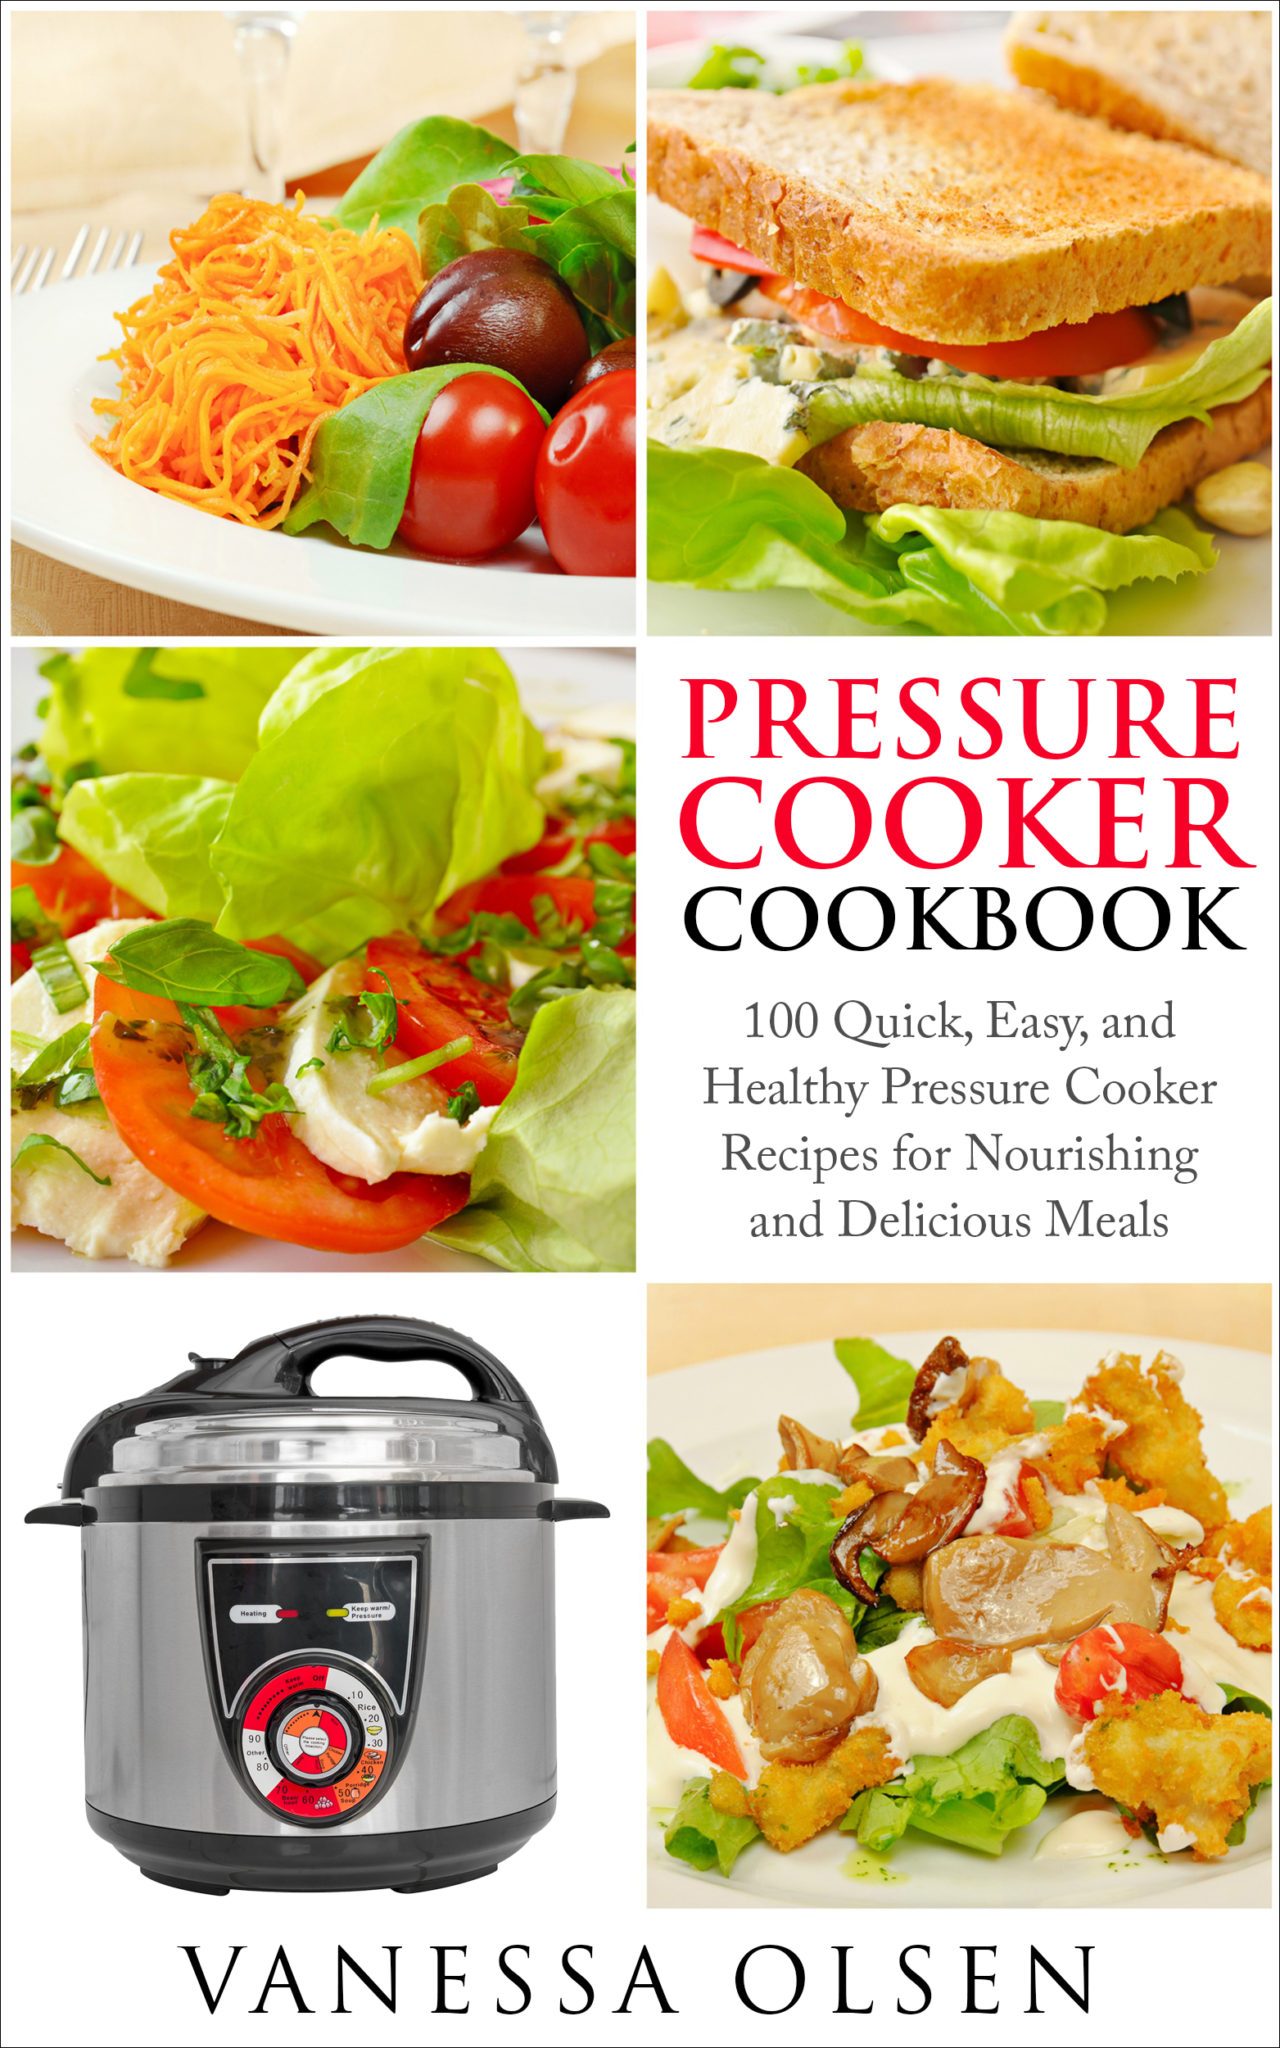 FREE: Pressure Cooker Cookbook – 100 Quick, Easy, and Healthy Pressure Cooker Recipes for Nourishing and Delicious Meals by Vanessa Olsen